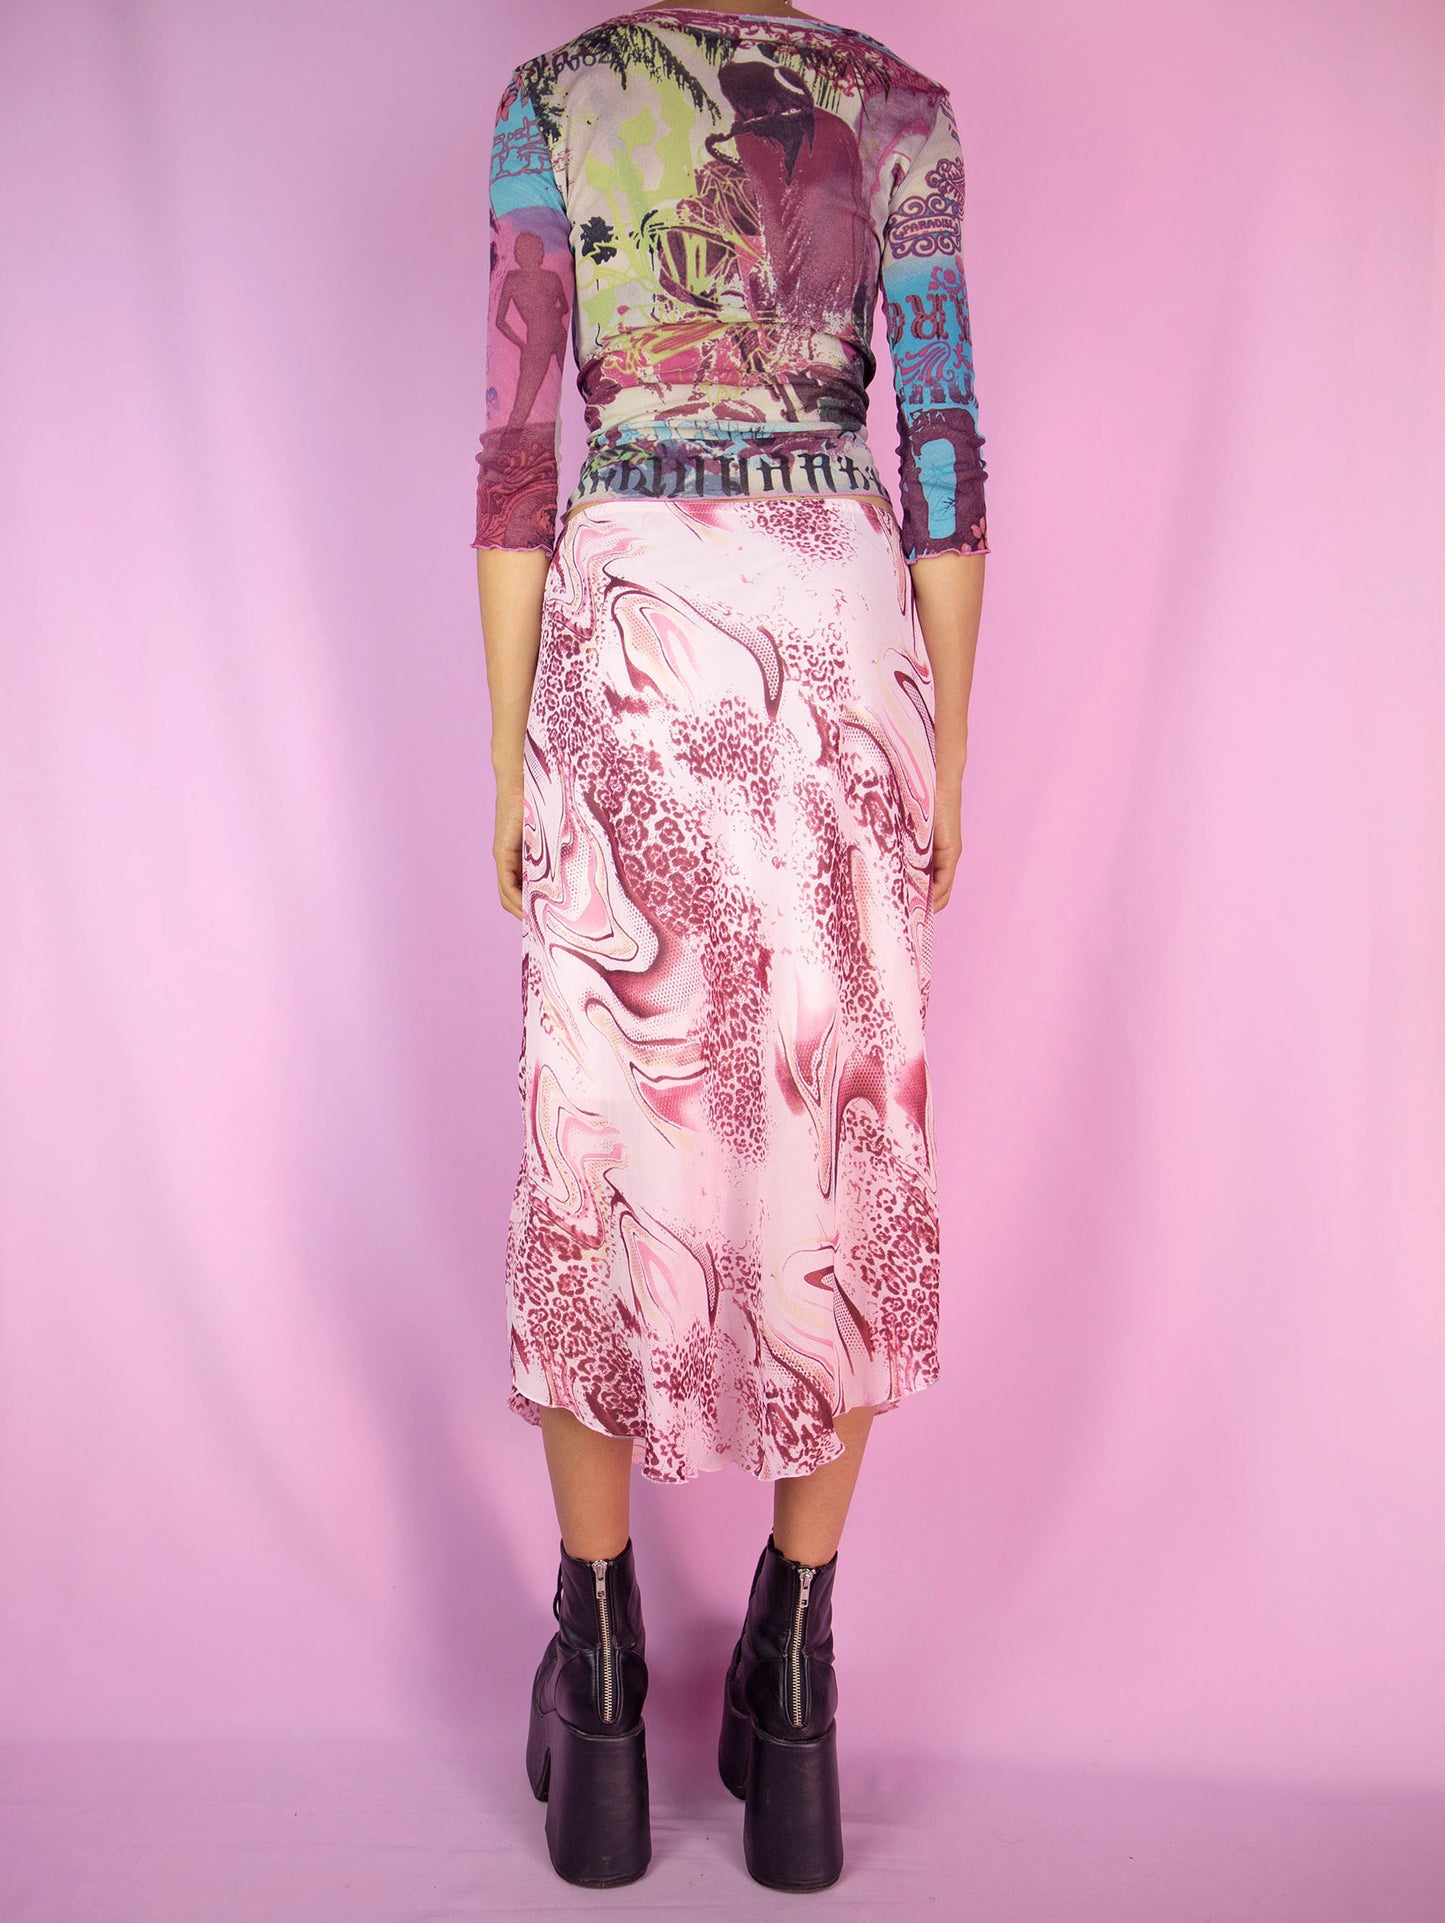 The Y2K Boho Pink Midi Skirt is a vintage pastel light pink and burgundy abstract print skirt with an elasticated waist and a pointed hem. Cyber fairy grunge 2000s summer maxi skirt.